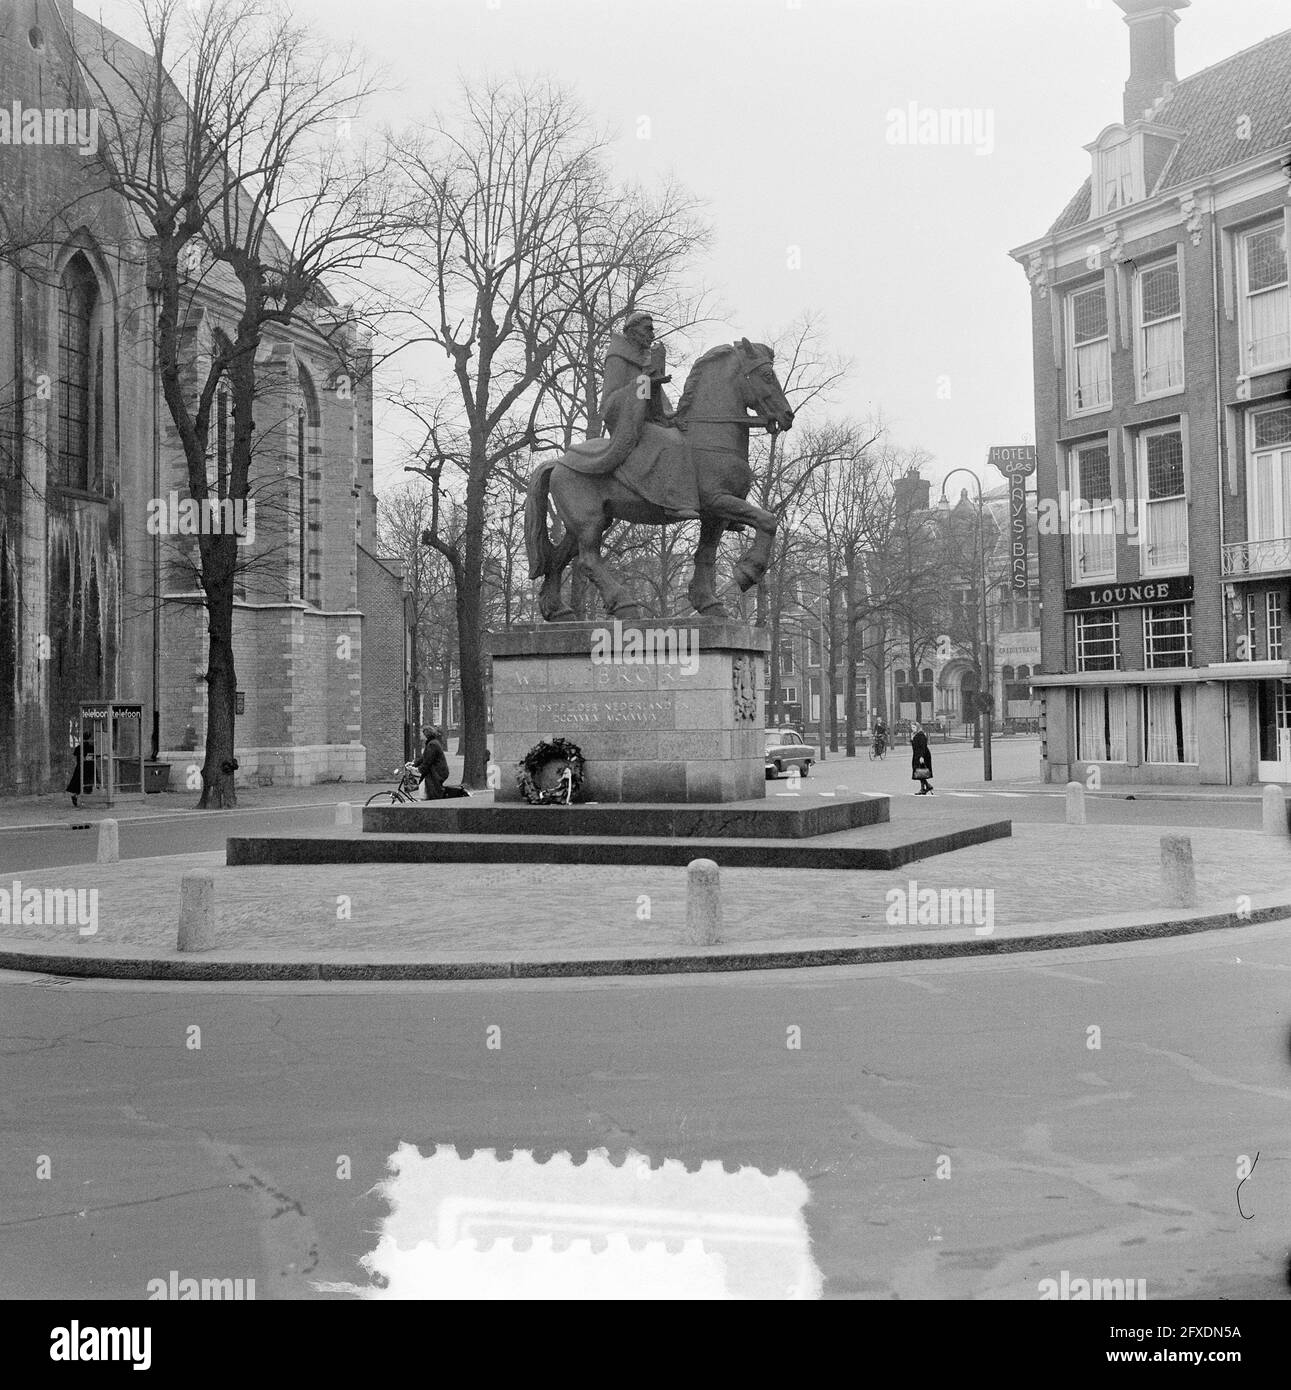 Cityscapes Utrecht. Statue of Willibrord at Lange Jansstraat - Korte Jansstraat - Janskerkhof. Janskerk to the left, 19 January 1954, buildings, cityscapes, statues, The Netherlands, 20th century press agency photo, news to remember, documentary, historic photography 1945-1990, visual stories, human history of the Twentieth Century, capturing moments in time Stock Photo